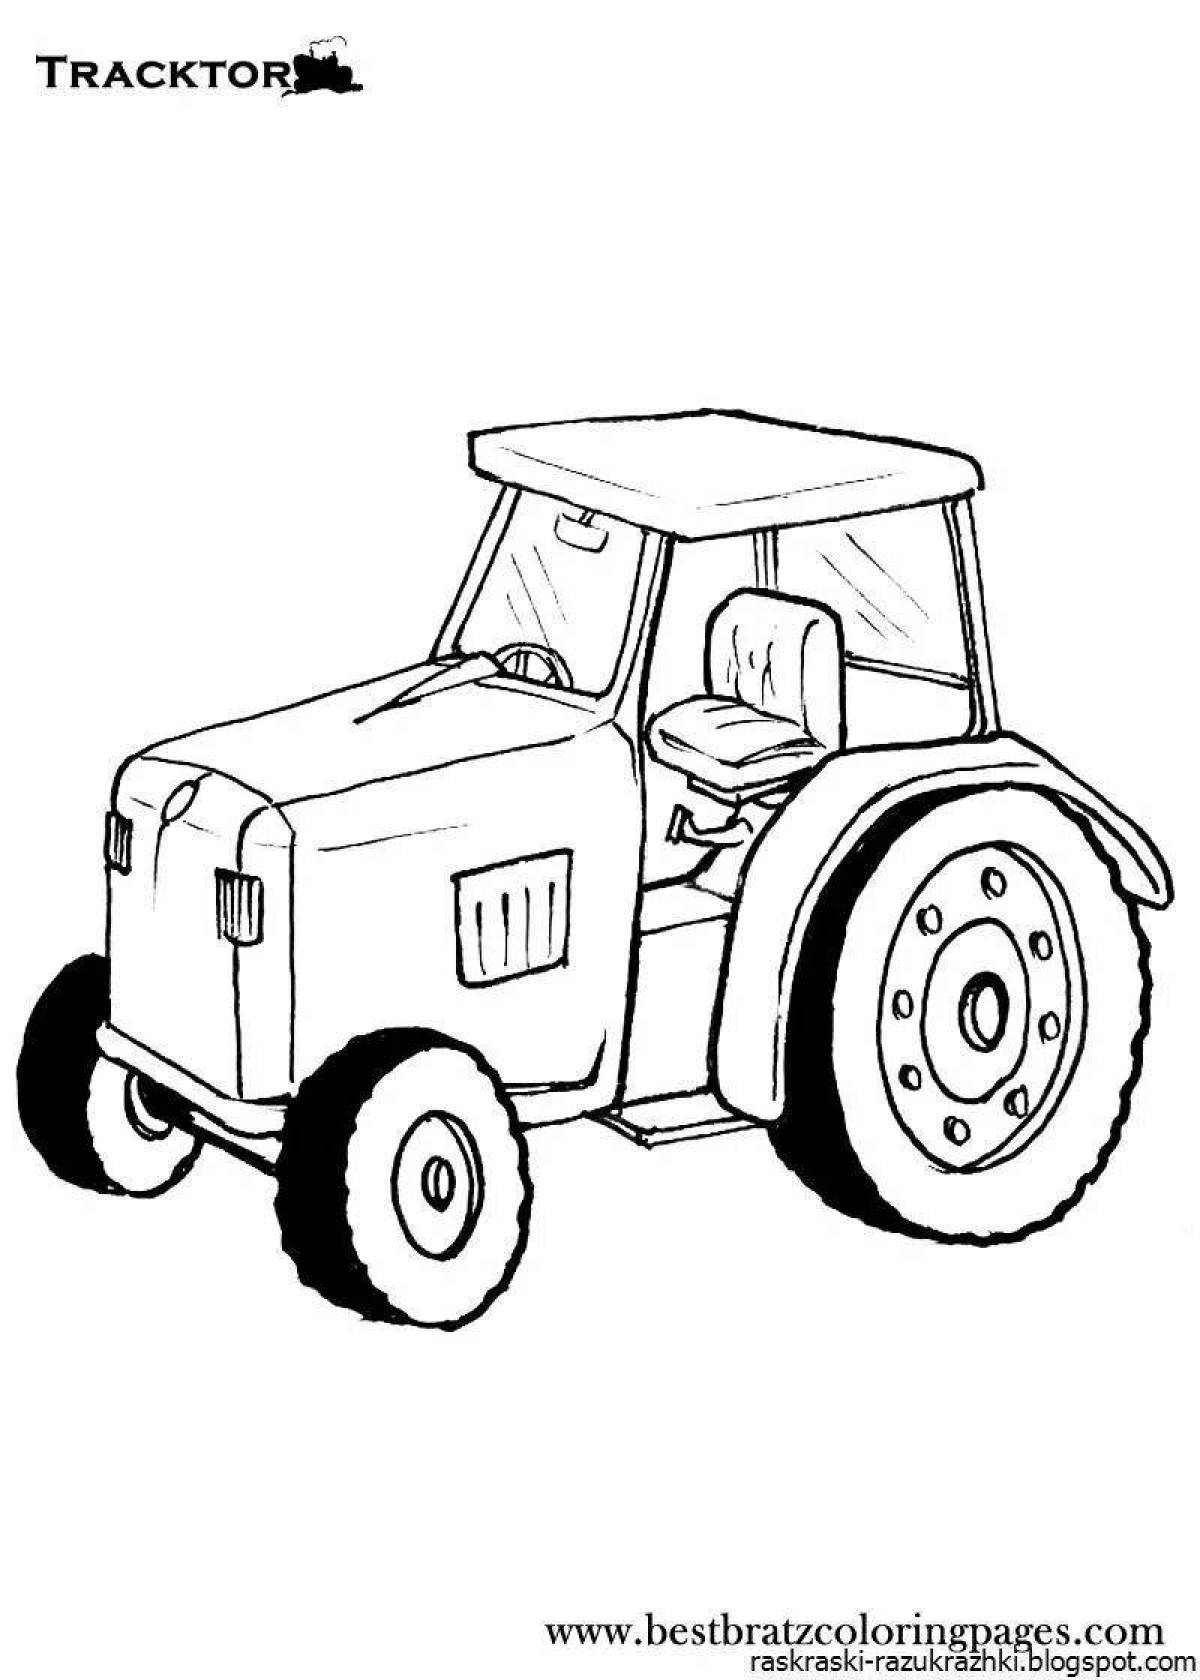 Crazy color drawing of a tractor for kids